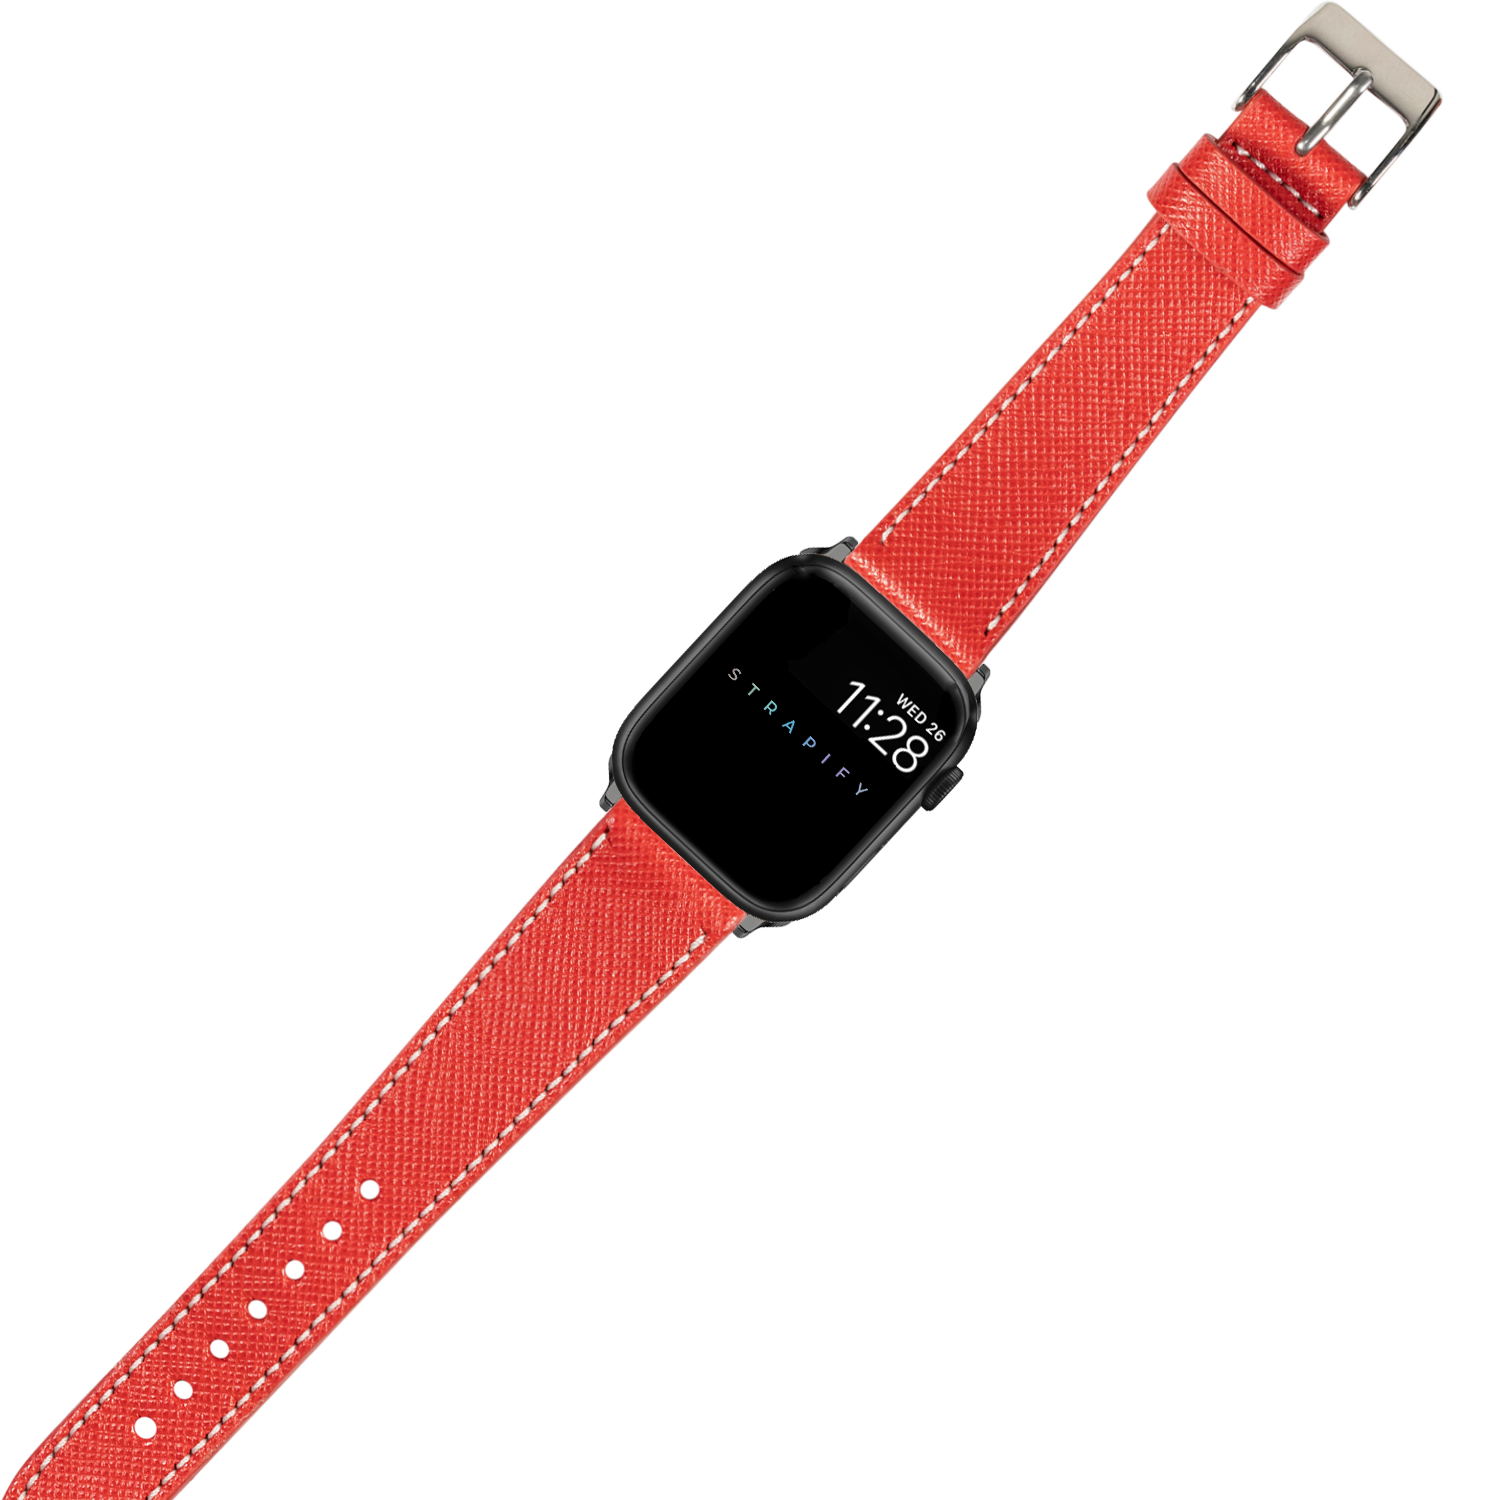 [Apple Watch] Saffiano Leather - Red with White Stitching